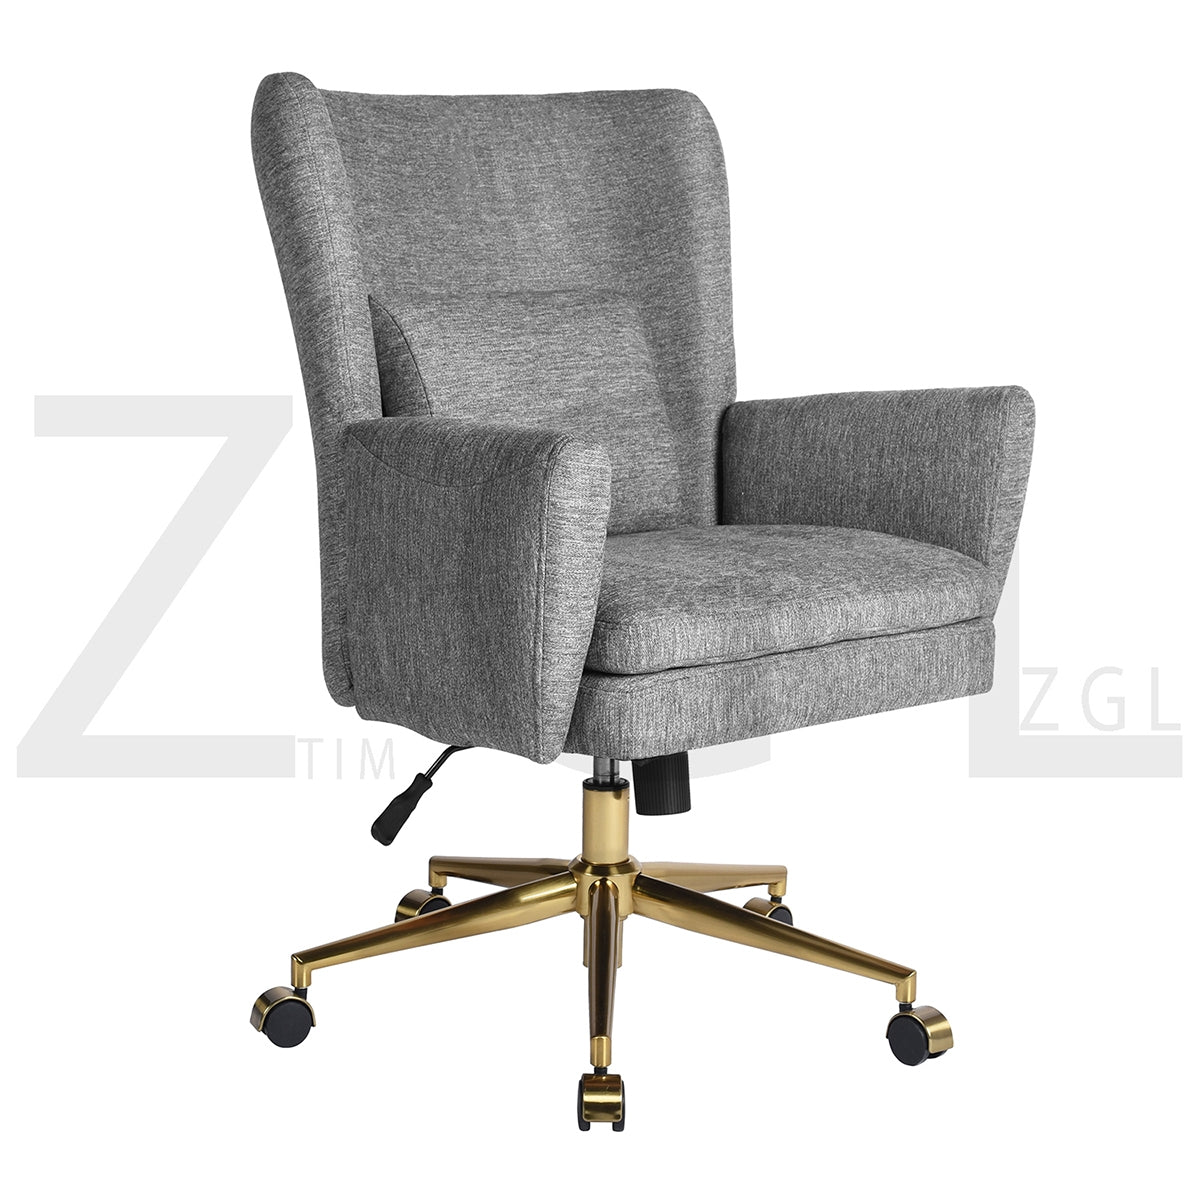 Vivid Gray Executive Chair Leisure Chair with Pillow